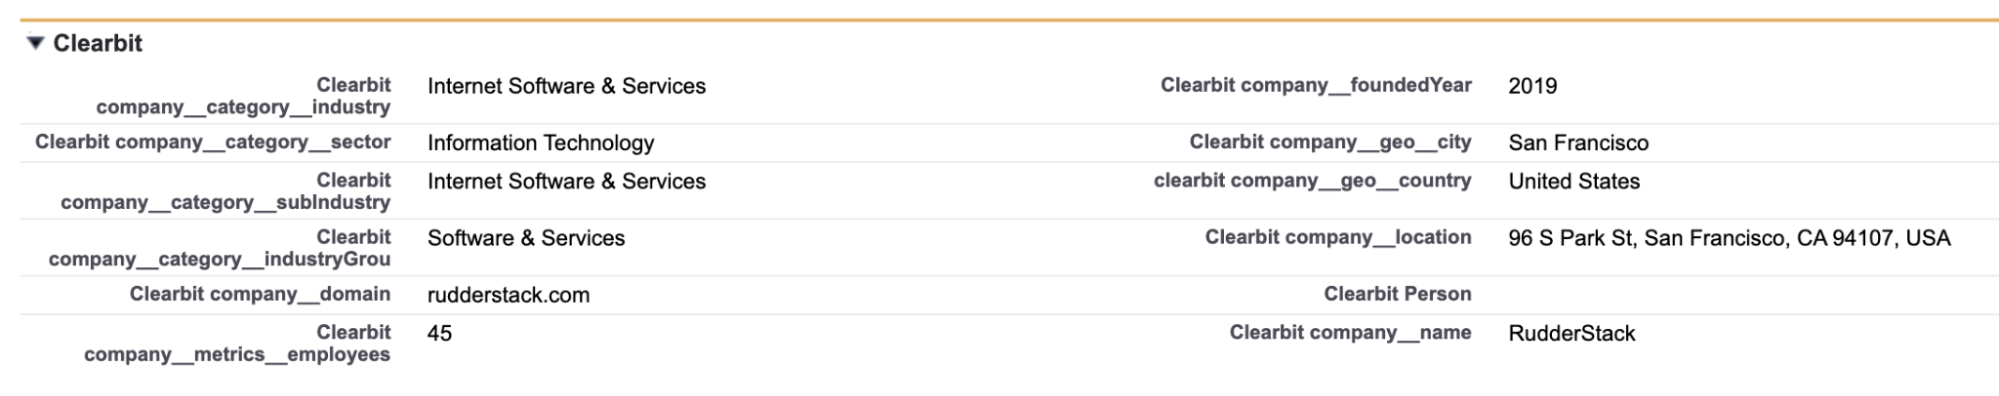 Salesforce Lead Record Detail Screen - Clearbit Fields Populated